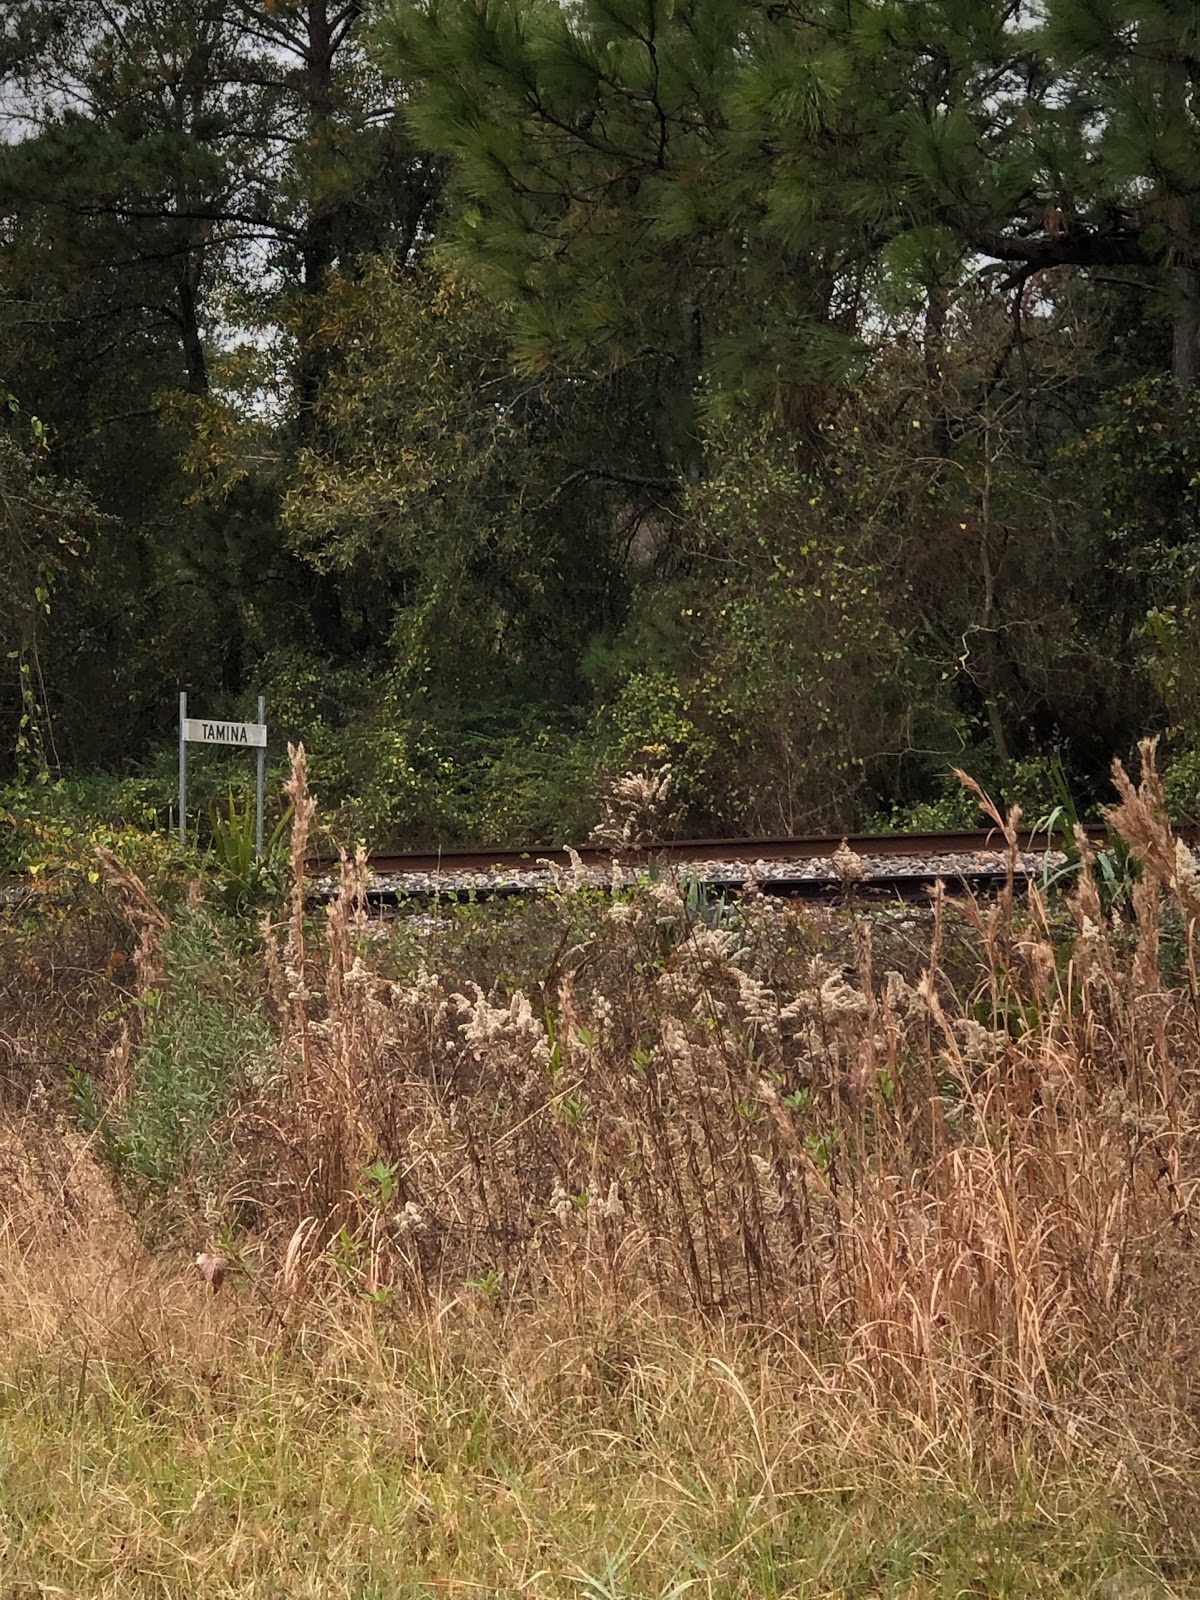 Tall grasses are shown in front of railroad tracks and a sign that reads "Tamina."